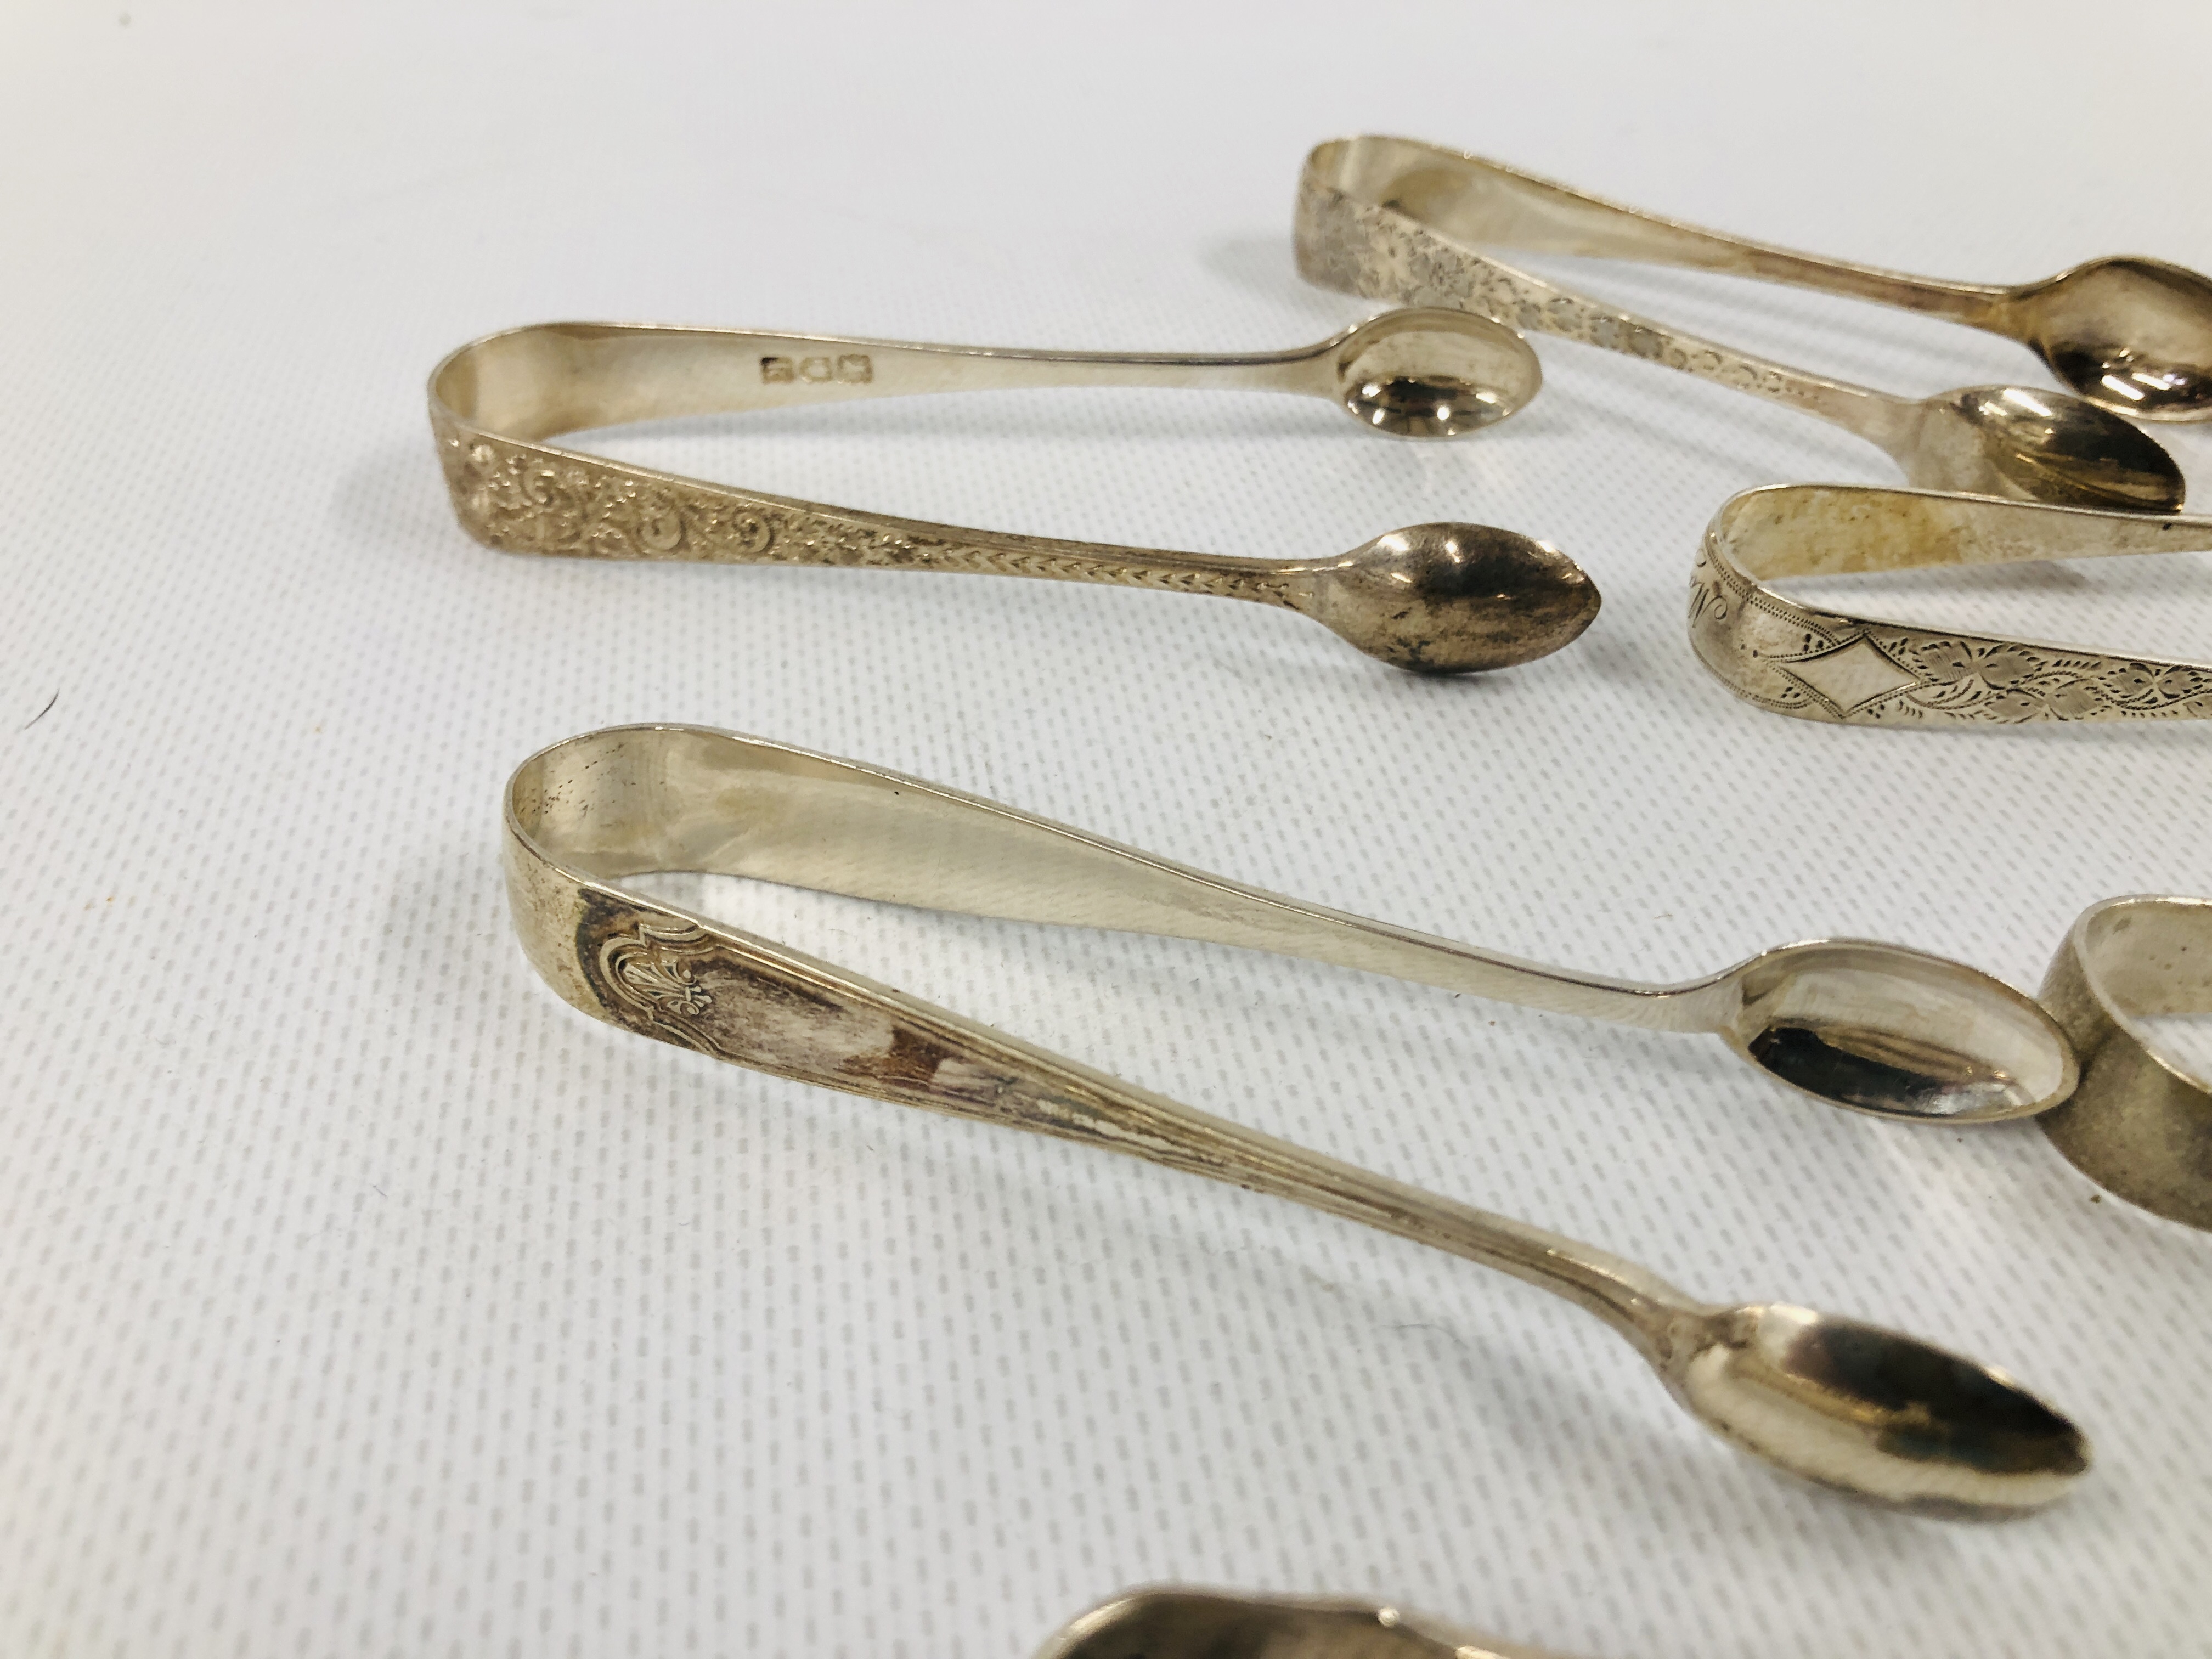 GROUP OF 8 VARIOUS SILVER SUGAR NIPS, VARIOUS MAKERS AND ASSAYS. - Image 3 of 7